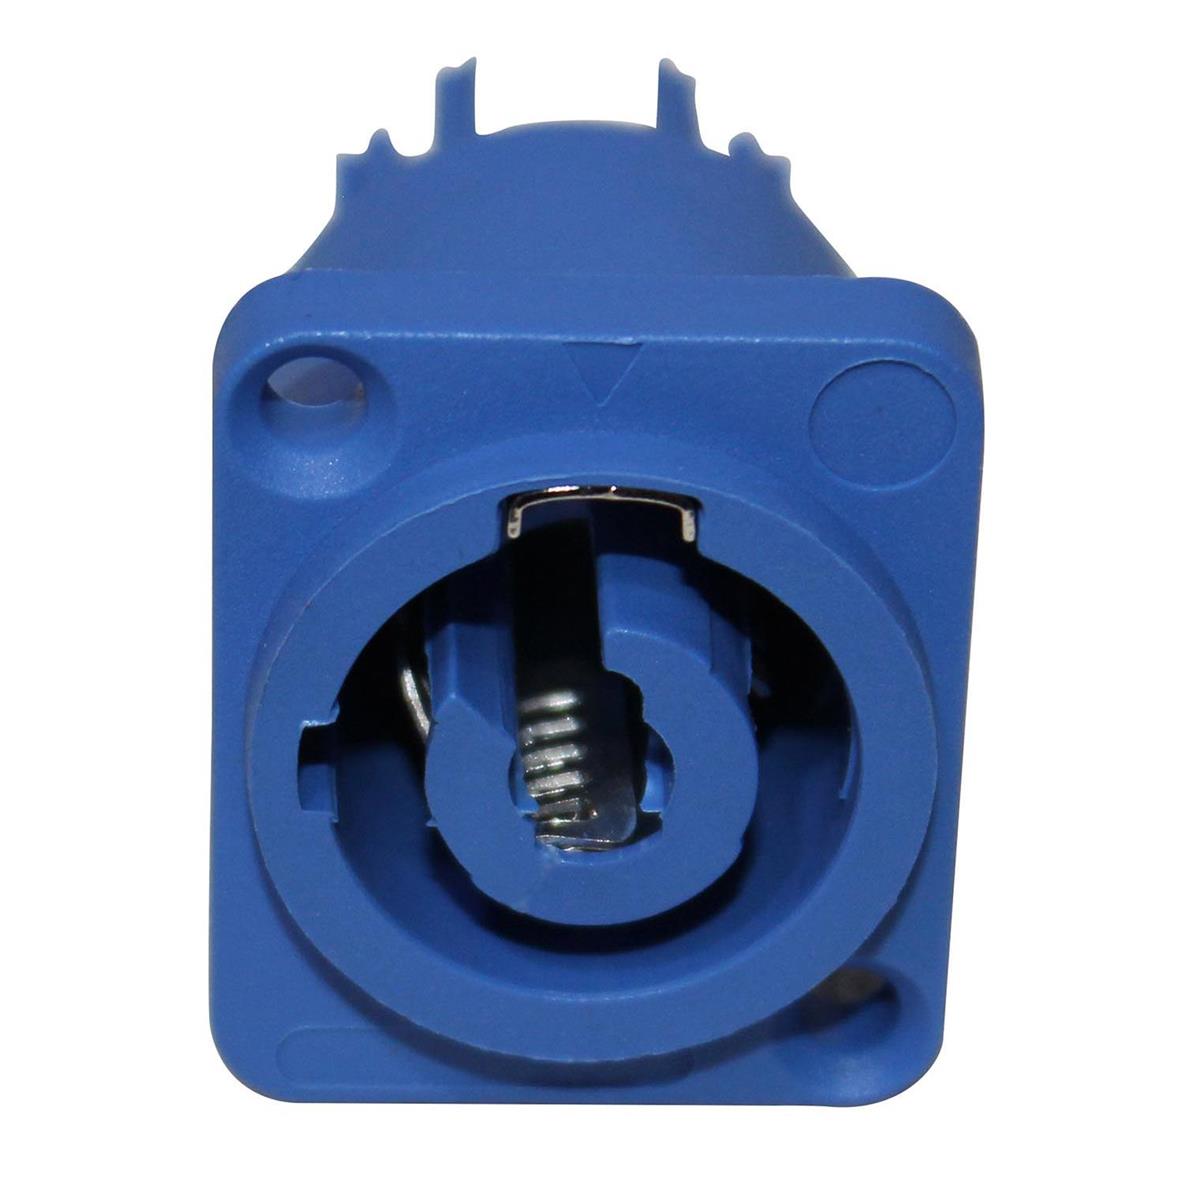 

ProX XC-PWCP Panel Mount PowerCon Female Connector, Blue